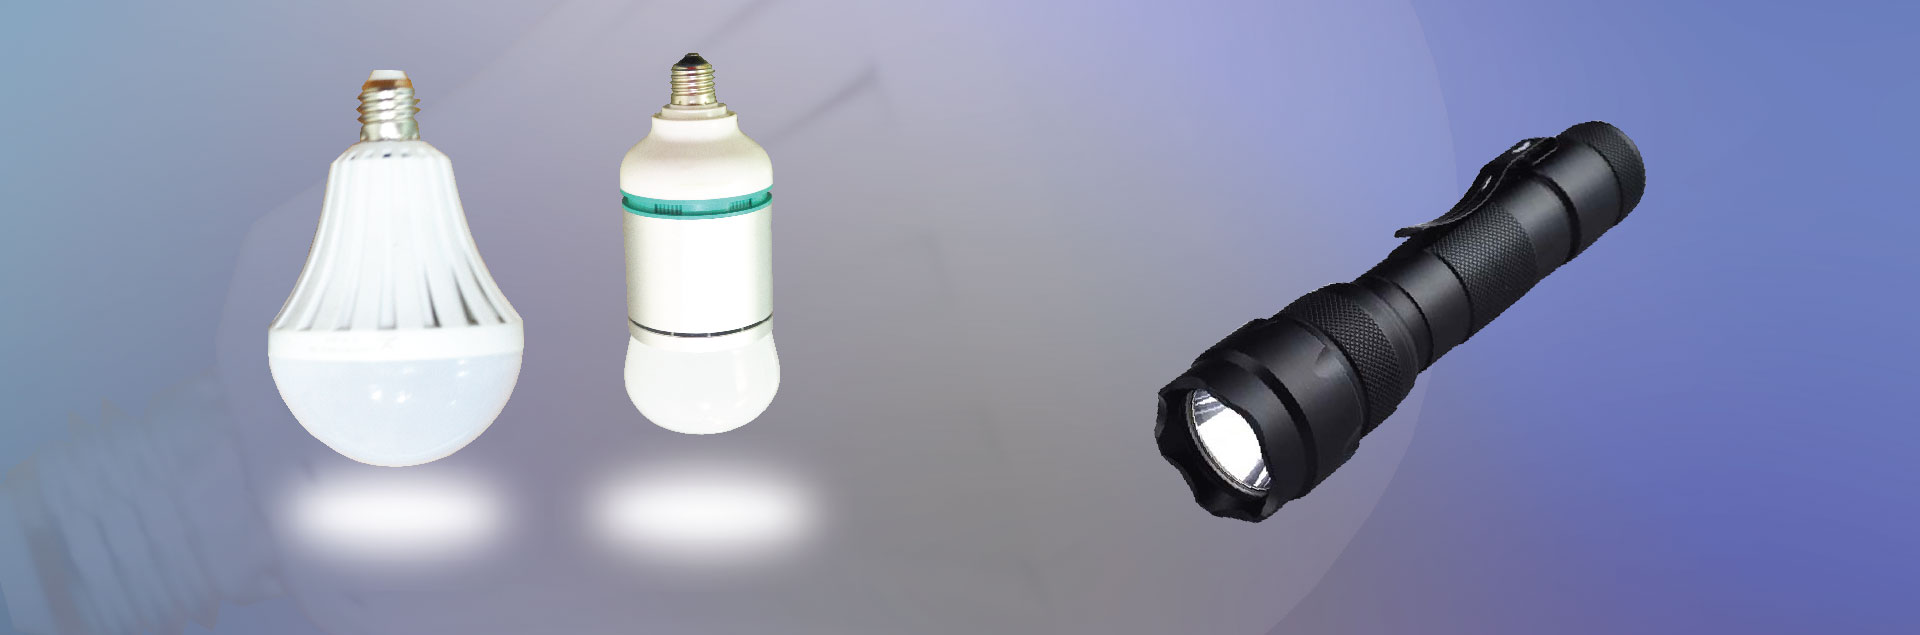 LED Bulb and Torch light